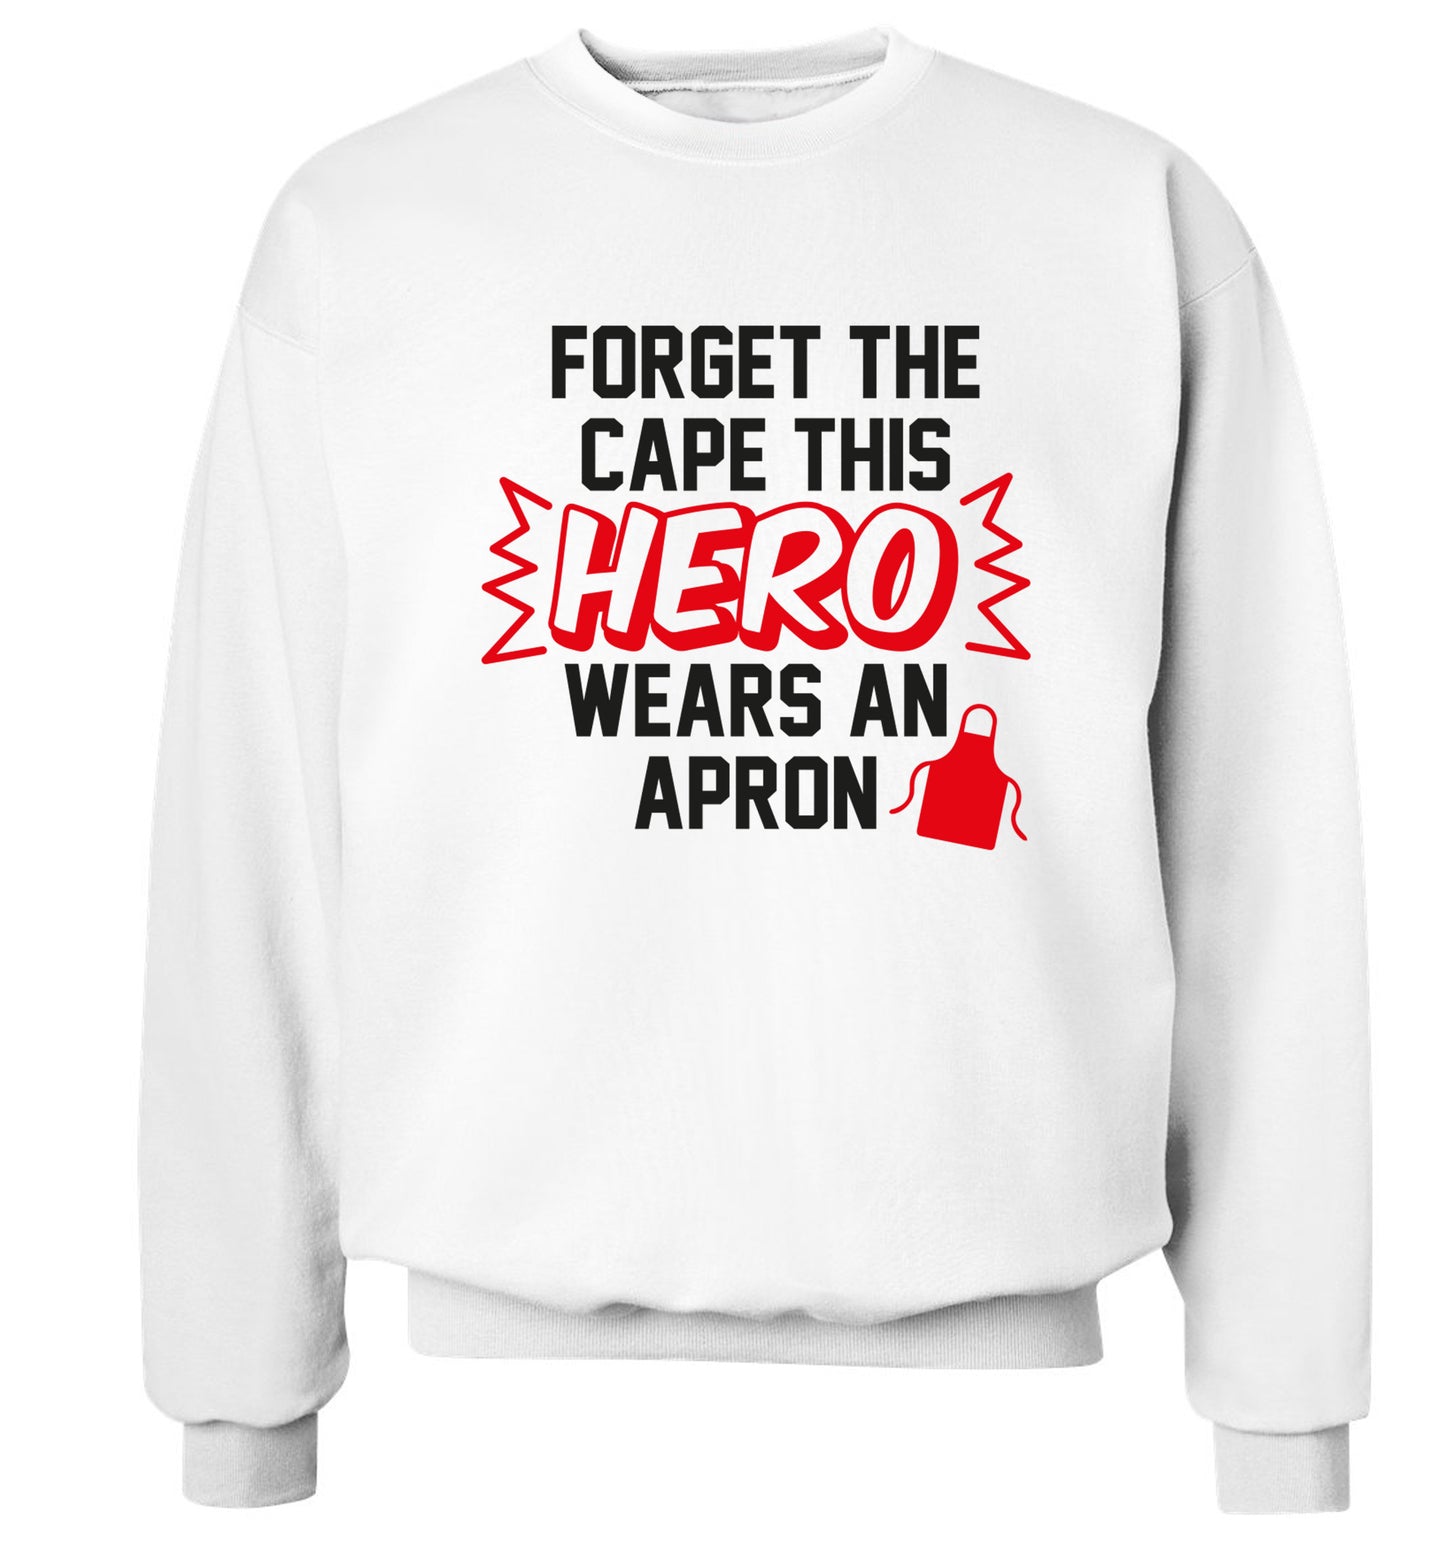 Forget the cape this hero wears an apron Adult's unisex white Sweater 2XL